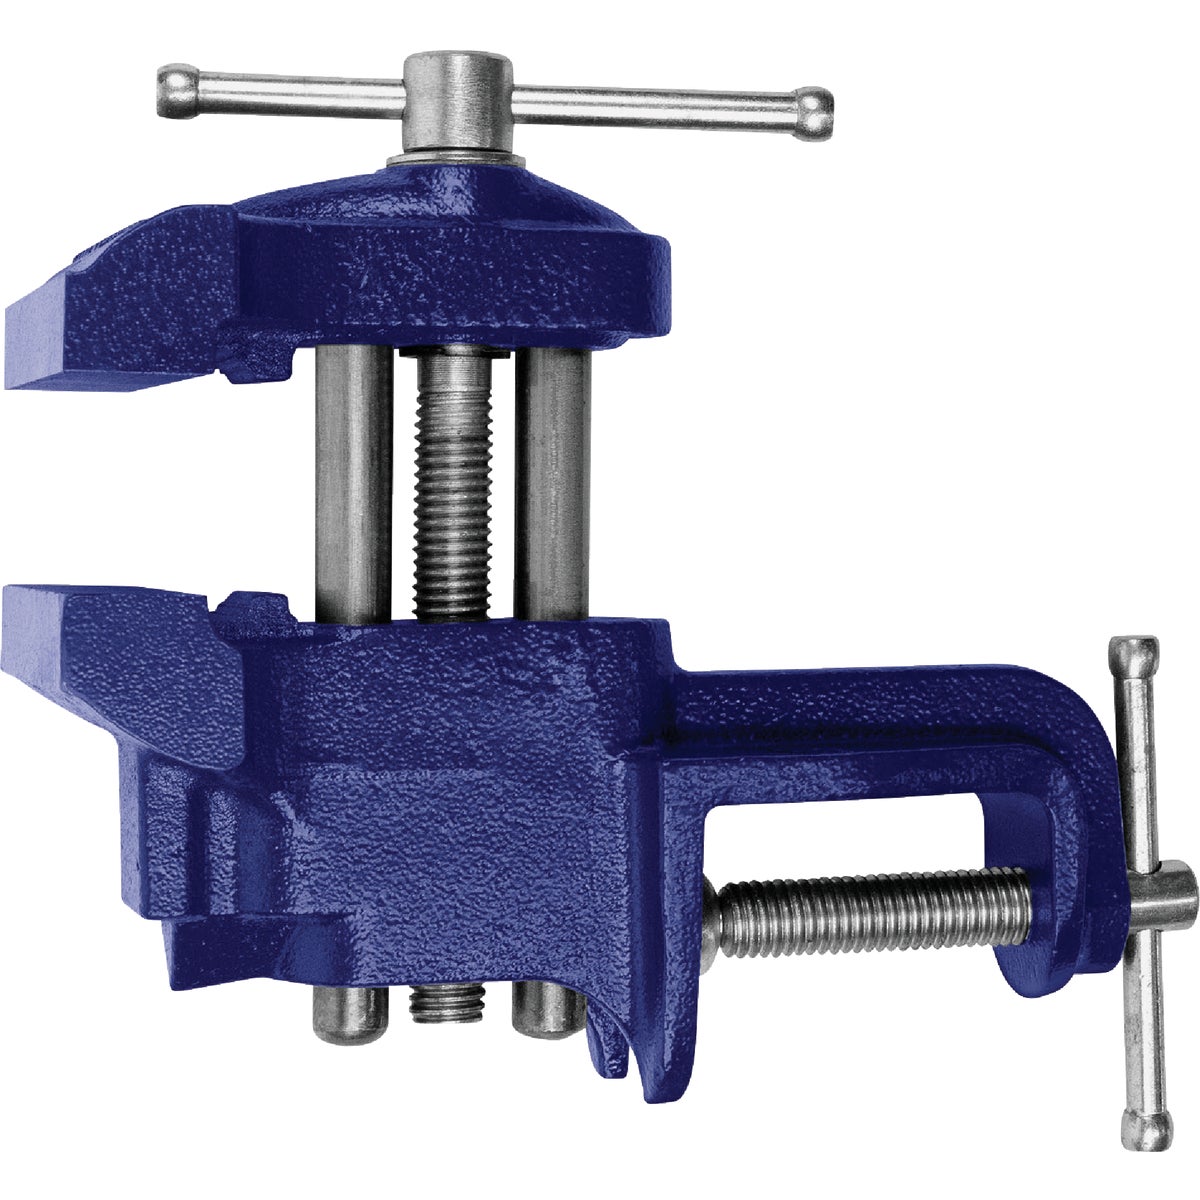 Item 327612, Heavy-duty vise designed for the professional woodworker.